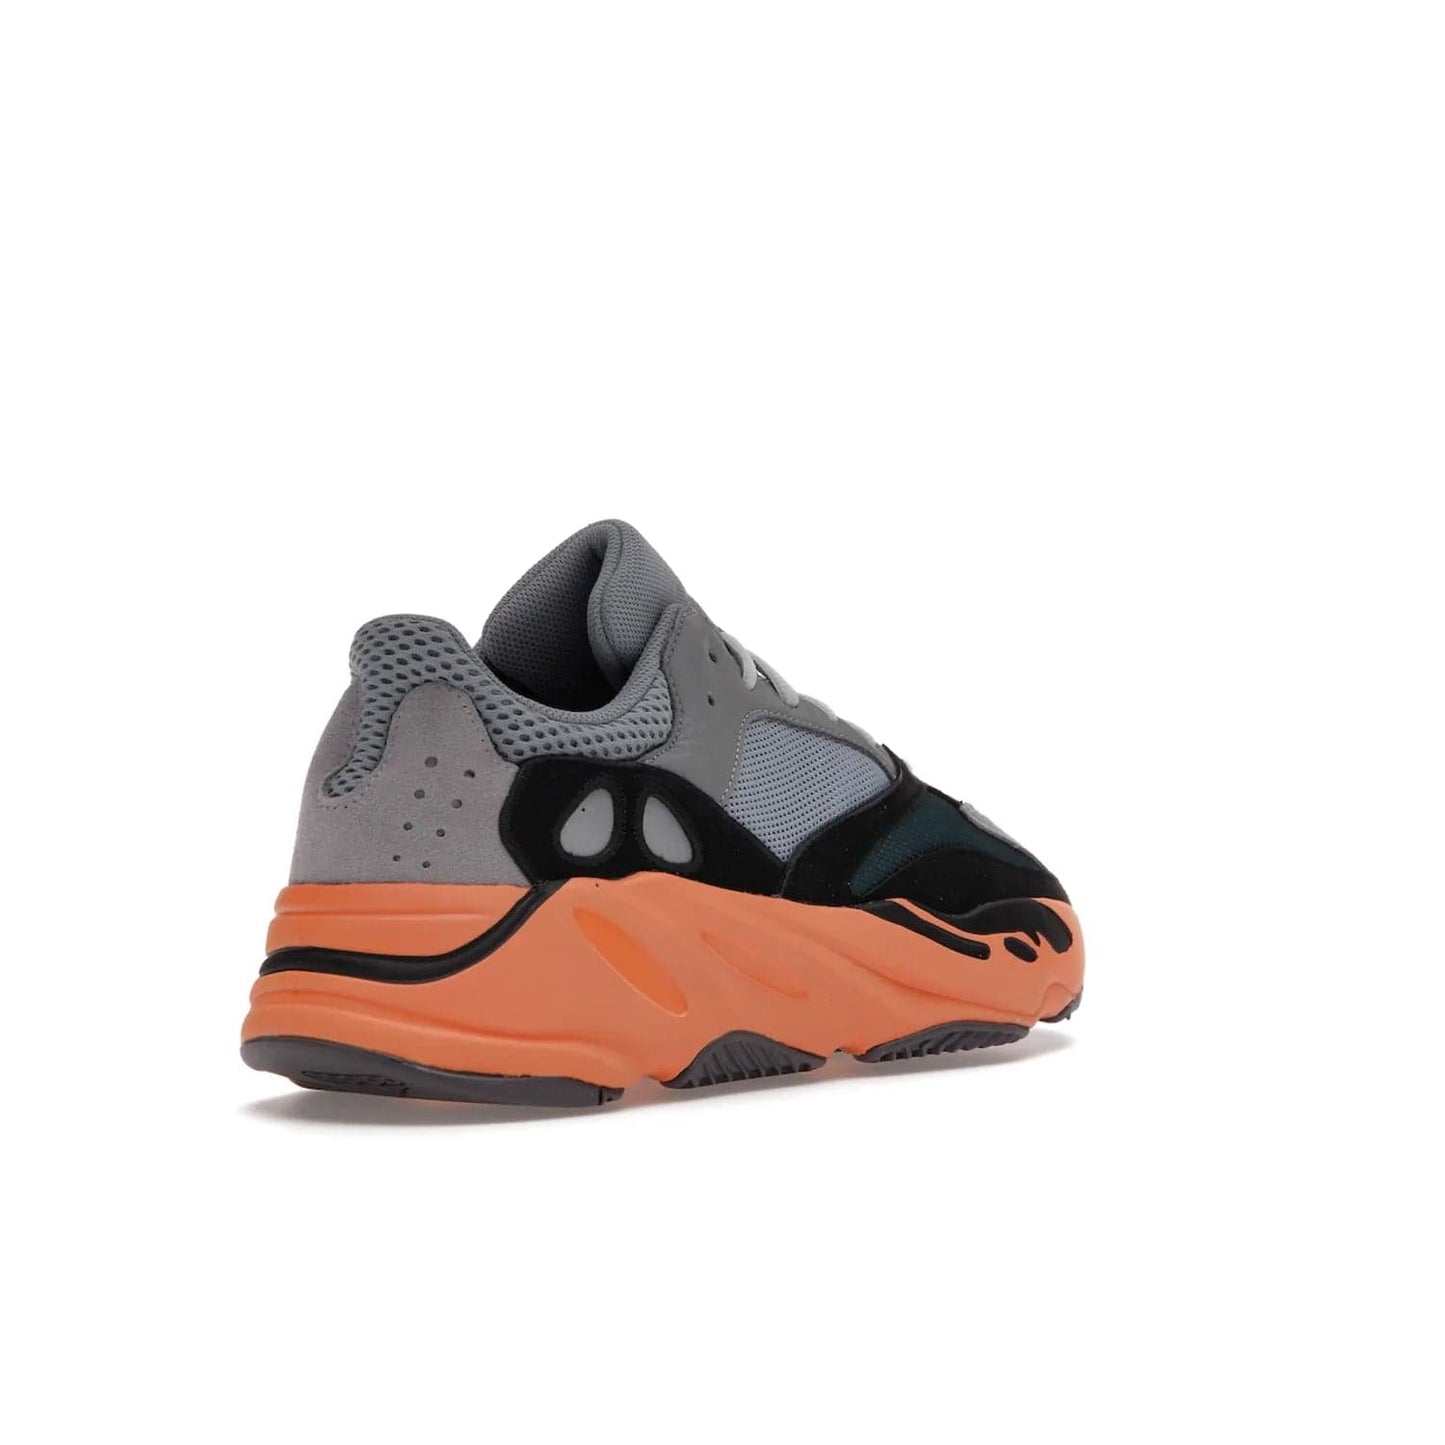 adidas Yeezy Boost 700 Wash Orange - Image 32 - Only at www.BallersClubKickz.com - Introducing the adidas Yeezy Boost 700 Wash Orange. Unique grey leather, suede, mesh upper and teal panels with a chunky Wash Orange Boost midsole. Release October 2021, make a statement today!